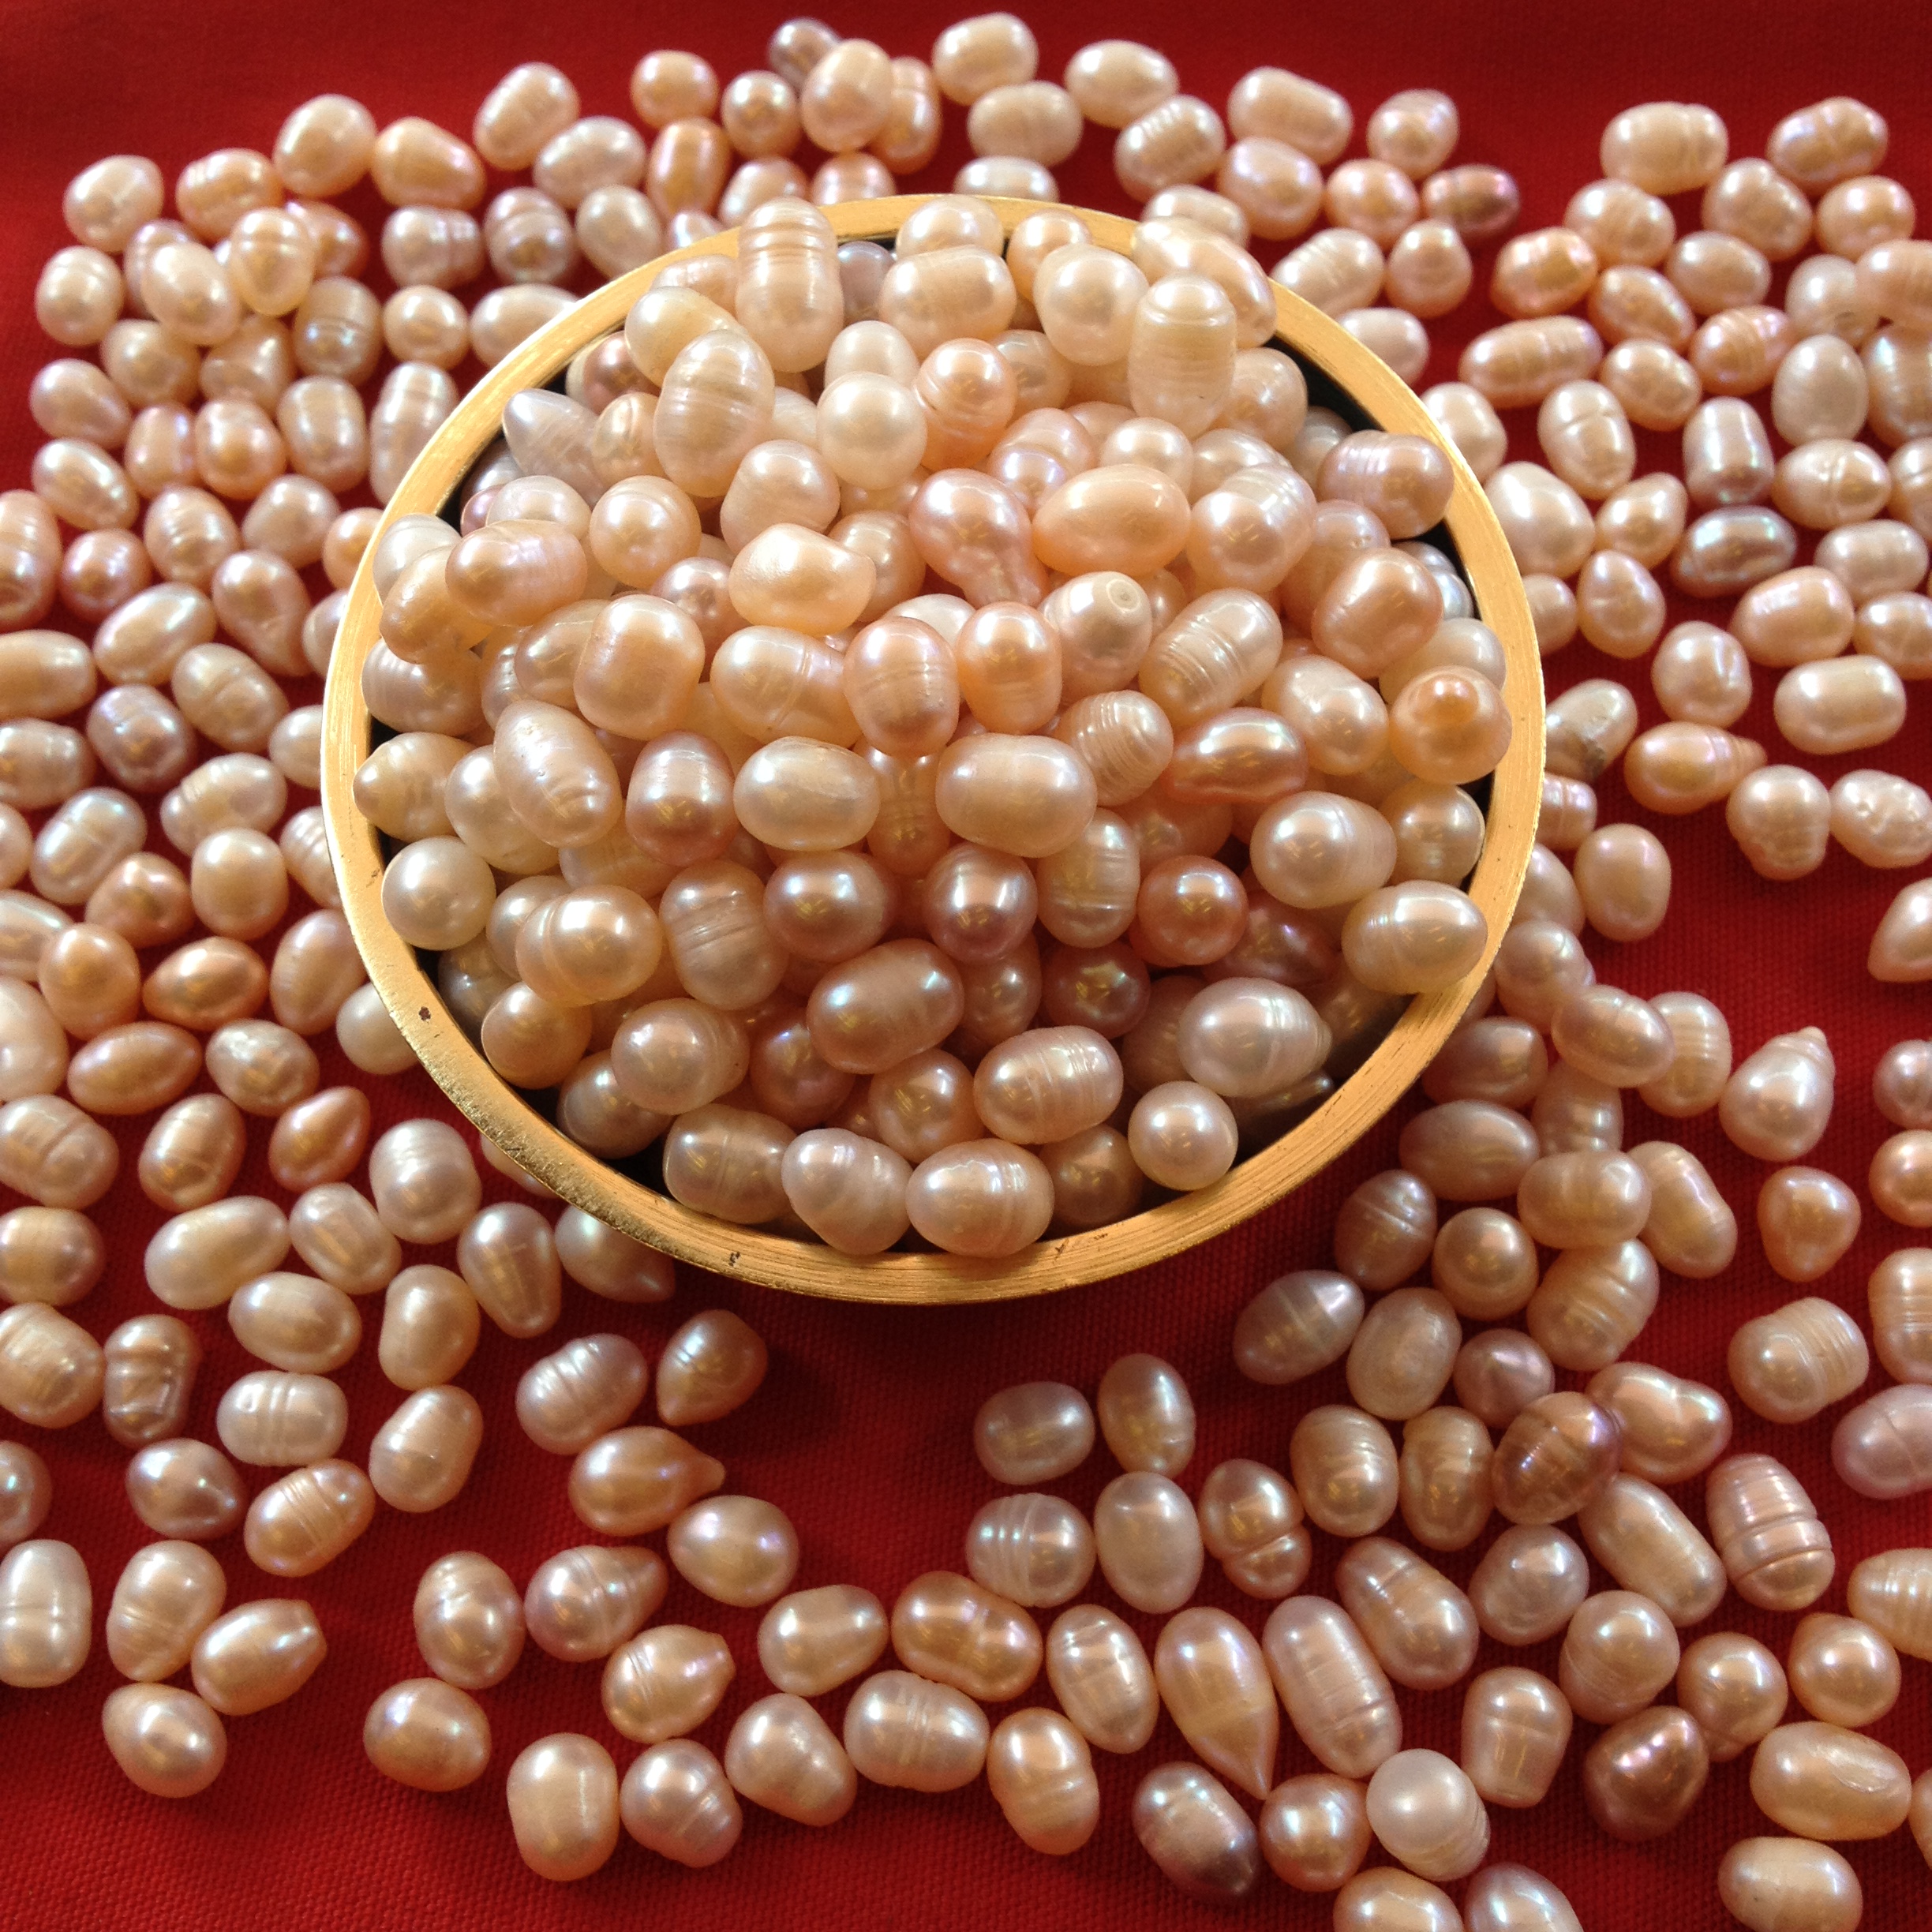 For Buddha Seven Gems For Manza An Furnace Buddhist Seven Treasures Natural Freshwater Pearls 50g First Class